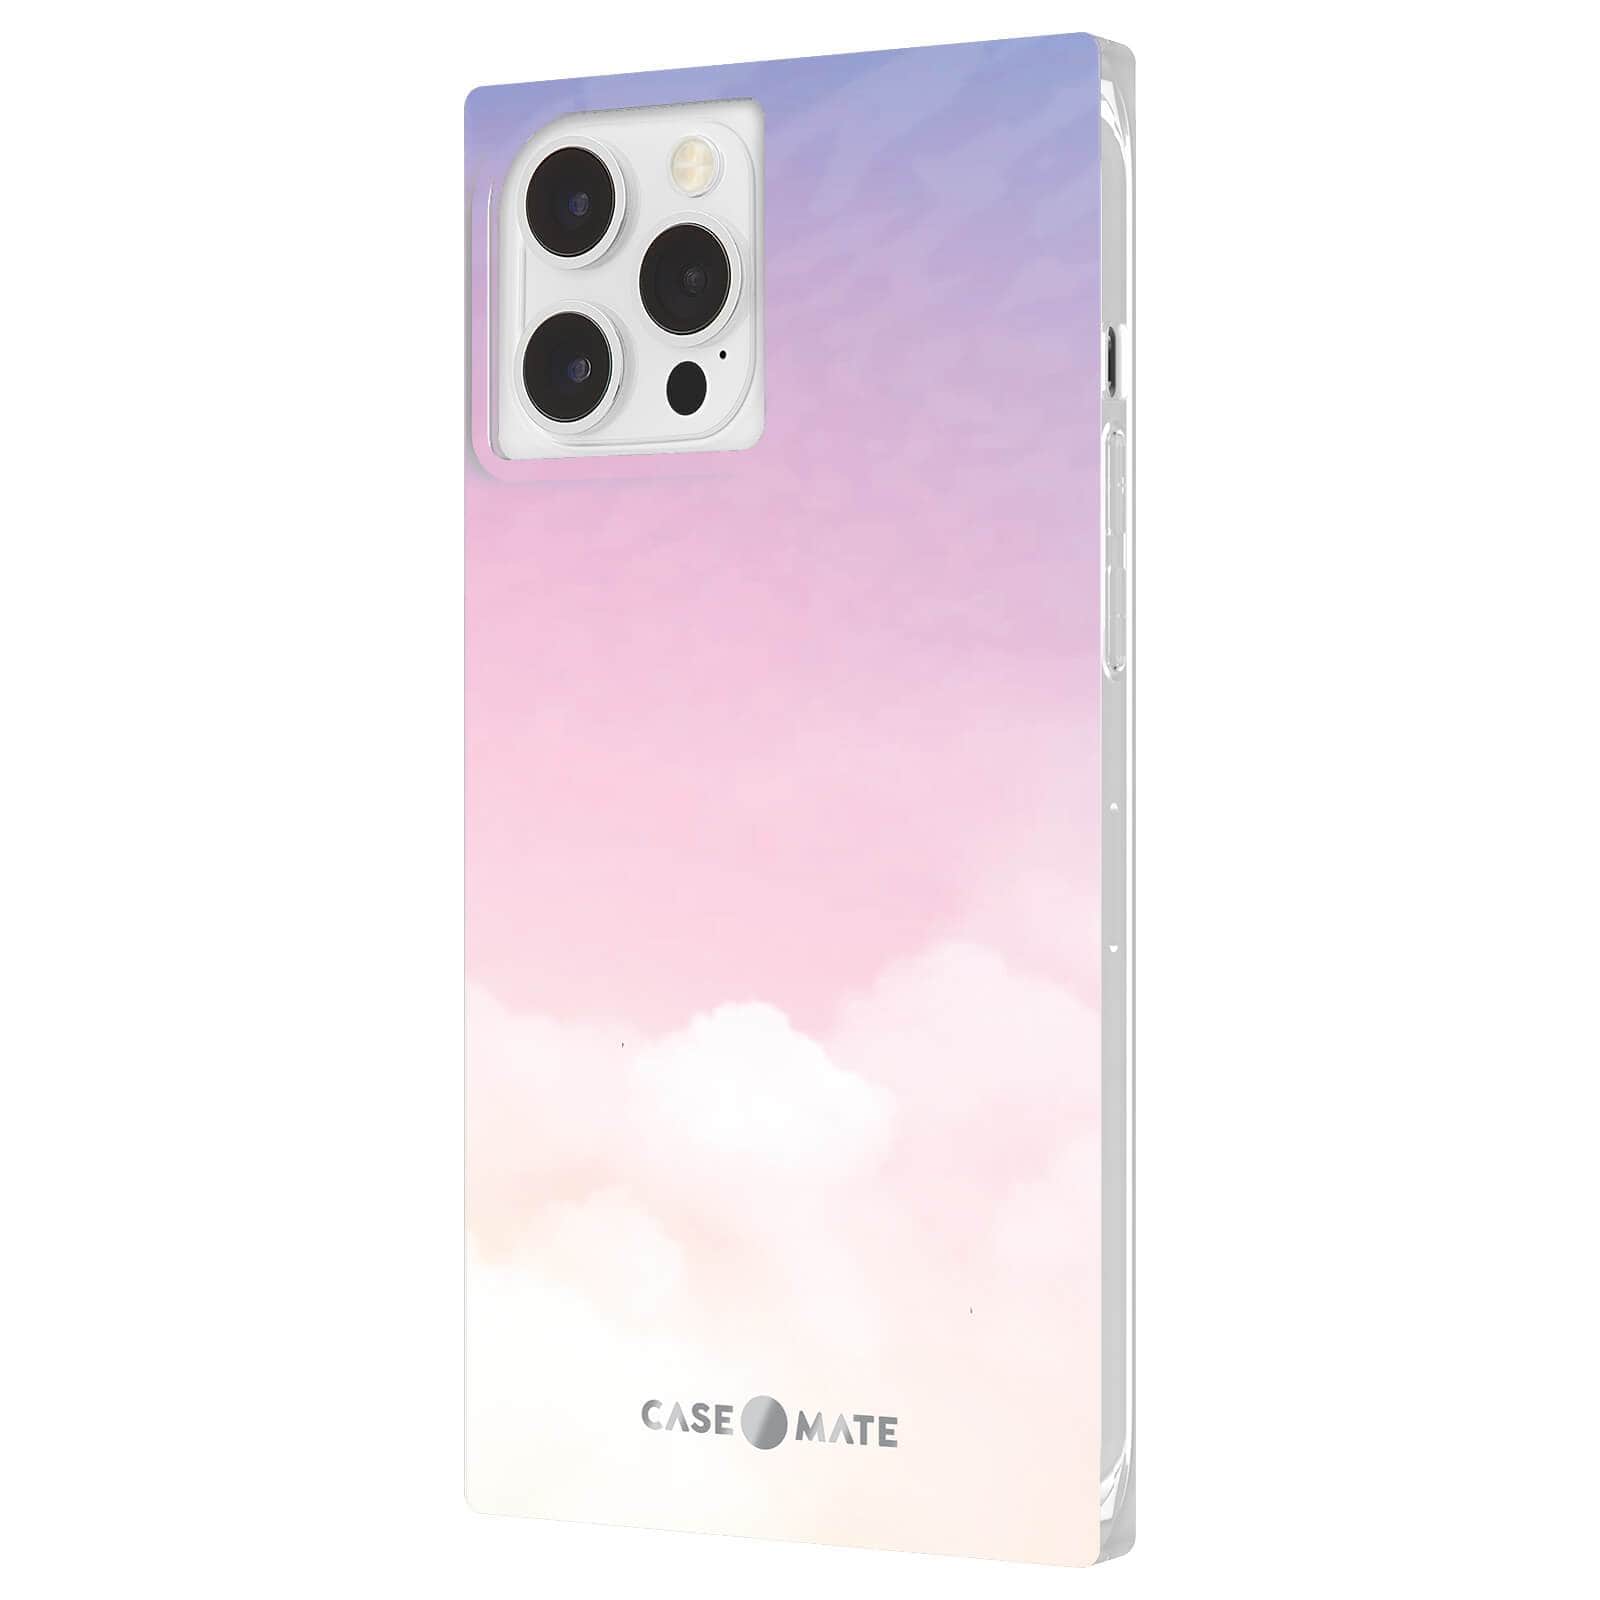 Cloud square case with sharp corners. color::Clouds